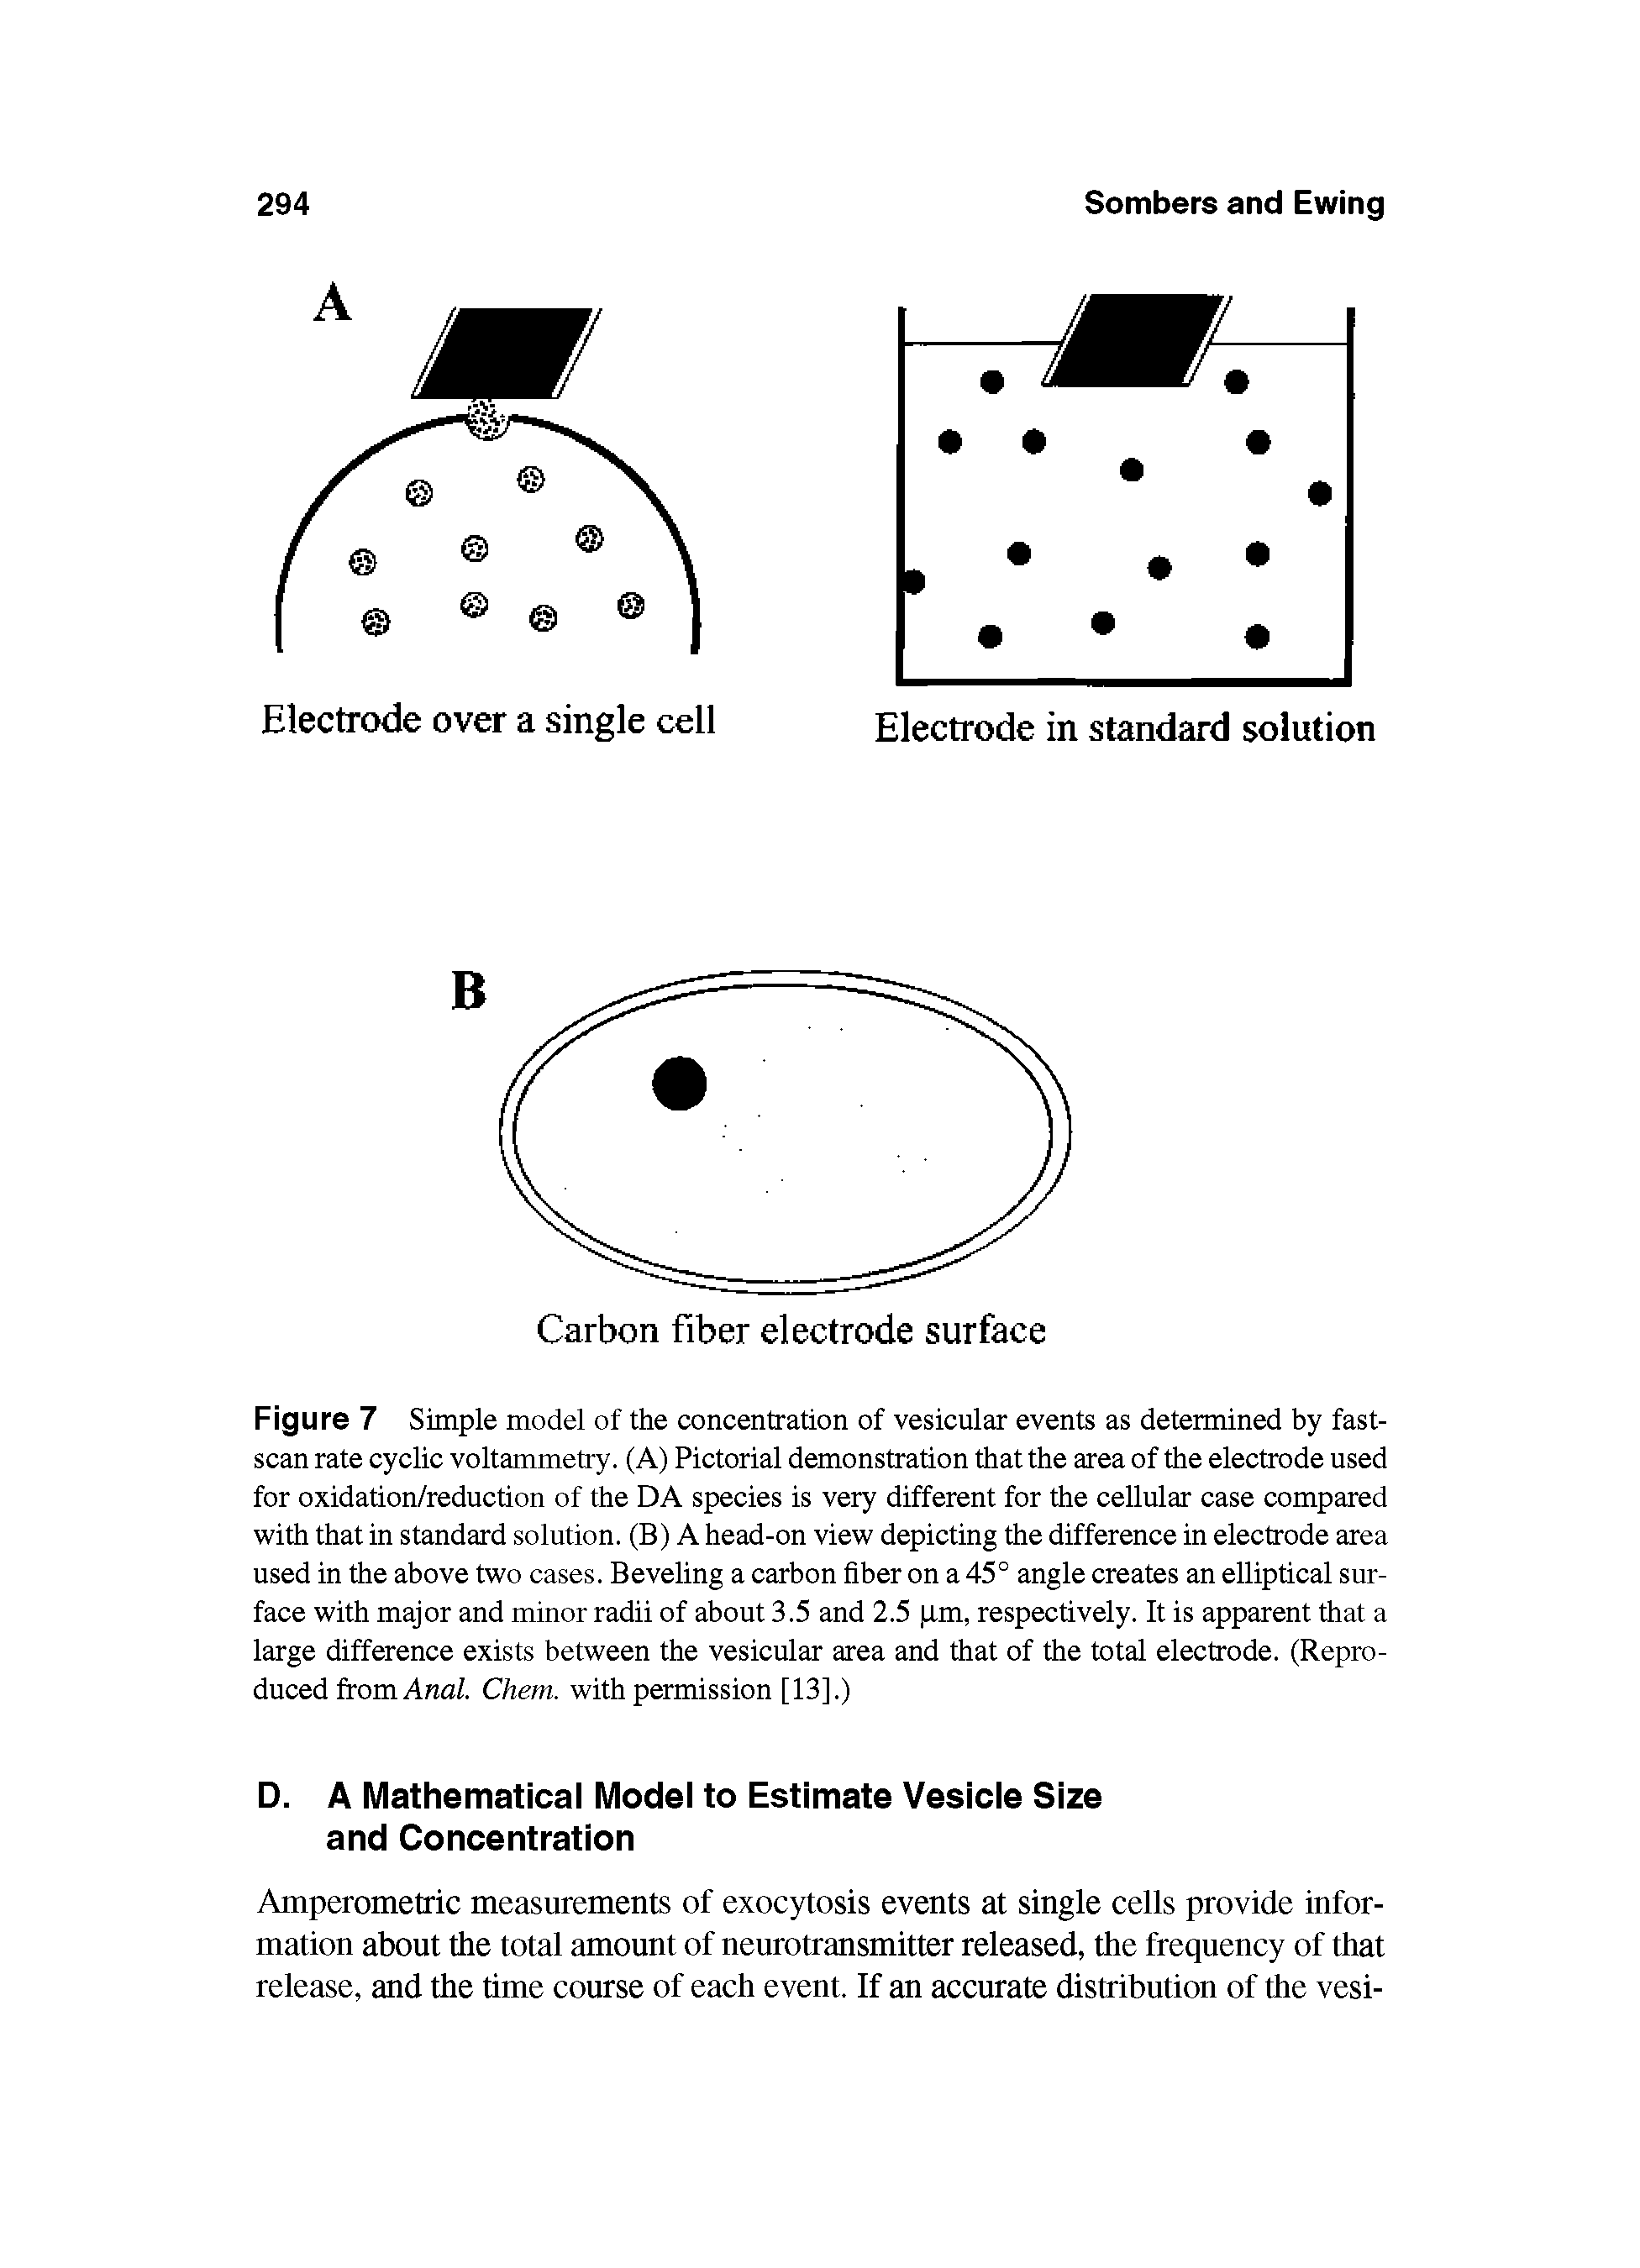 Figure 7 Simple model of the concentration of vesicular events as determined by fast-scan rate cyclic voltammetry. (A) Pictorial demonstration that the area of the electrode used for oxidation/reduction of the DA species is very different for the cellular case compared with that in standard solution. (B) A head-on view depicting the difference in electrode area used in the above two cases. Bevehng a carbon fiber on a 45° angle creates an elliptical surface with major and minor radii of about 3.5 and 2.5 i,m, respectively. It is apparent that a large difference exists between the vesicular area and that of the total electrode. (Reproduced from Ana/. Chem. with permission [13].)...